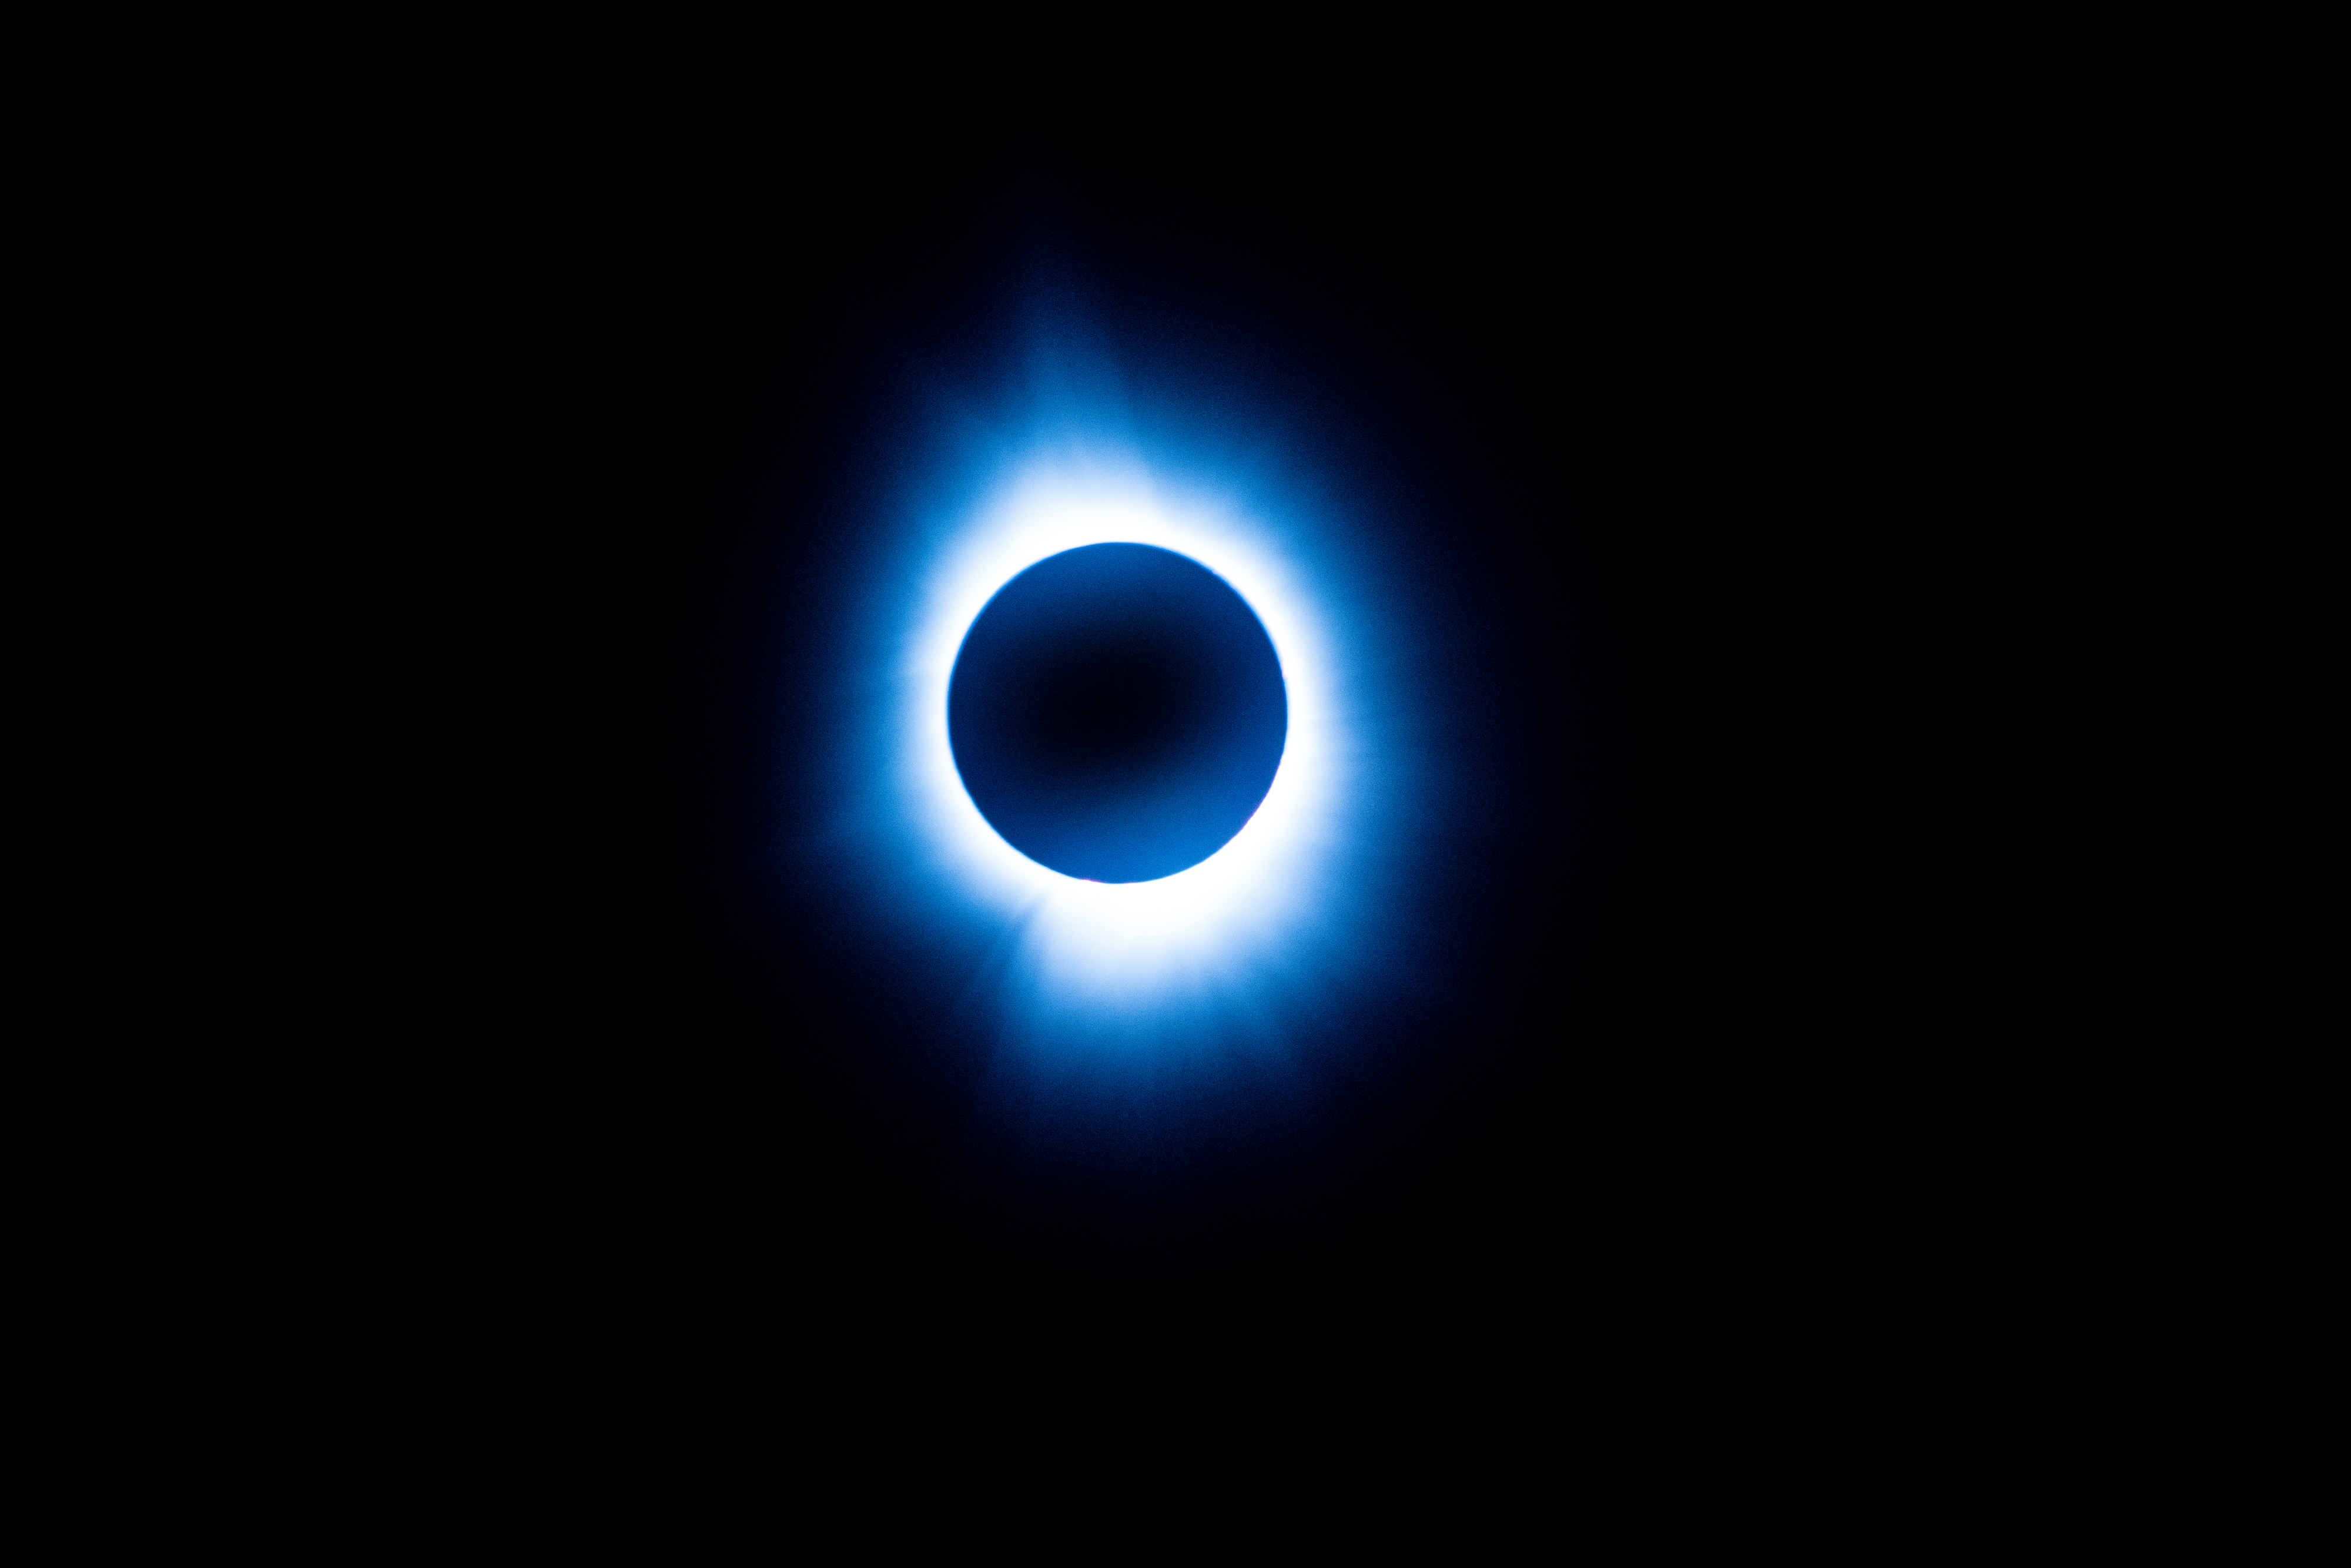 Total solar eclipse with a glowing corona visible around the obscured sun